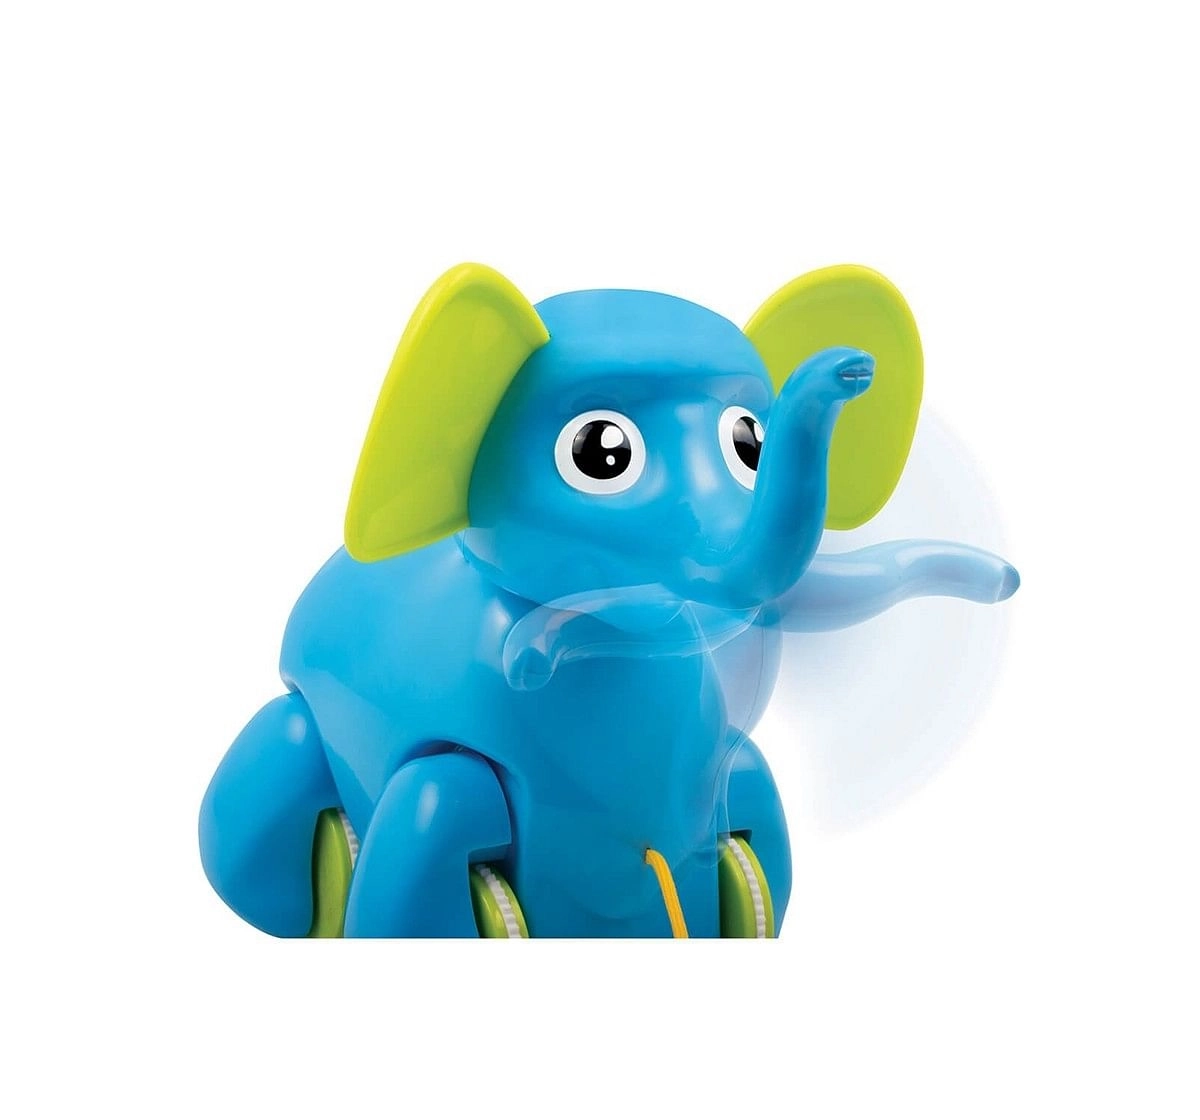  Giggles Alphy The Elephant Early Learner Toys for Kids age 12M+ (Blue)